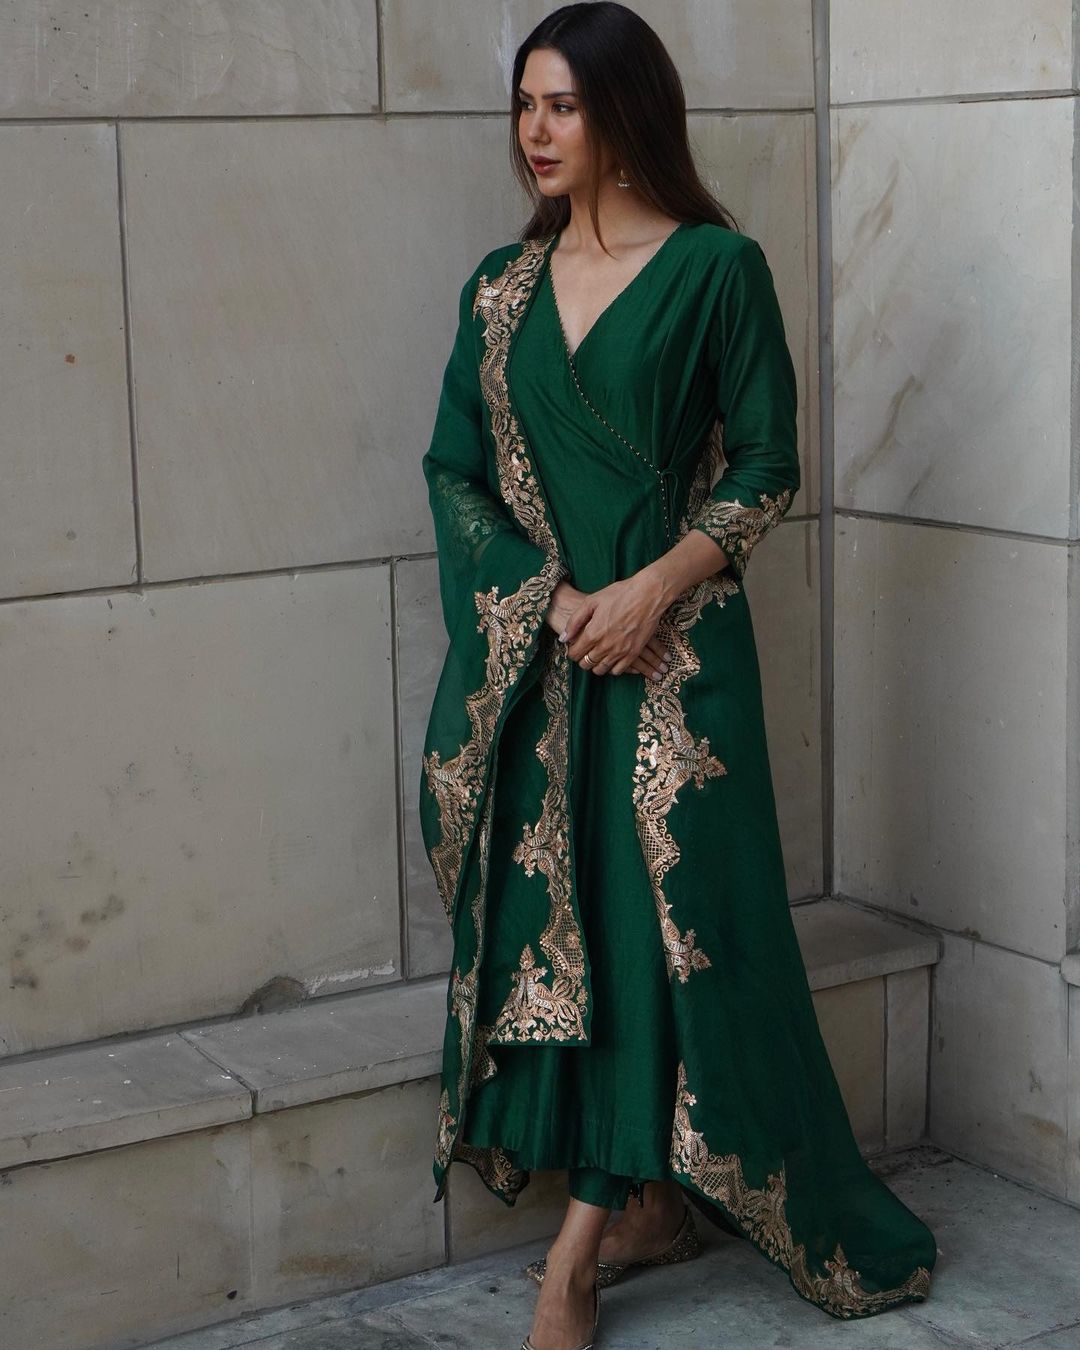 Hariyali Teej 2021 Celeb-Inspired Look: Nora Fatehi in Gorgeous Studded  Saree Is All The Inspiration You Need This Festive Season